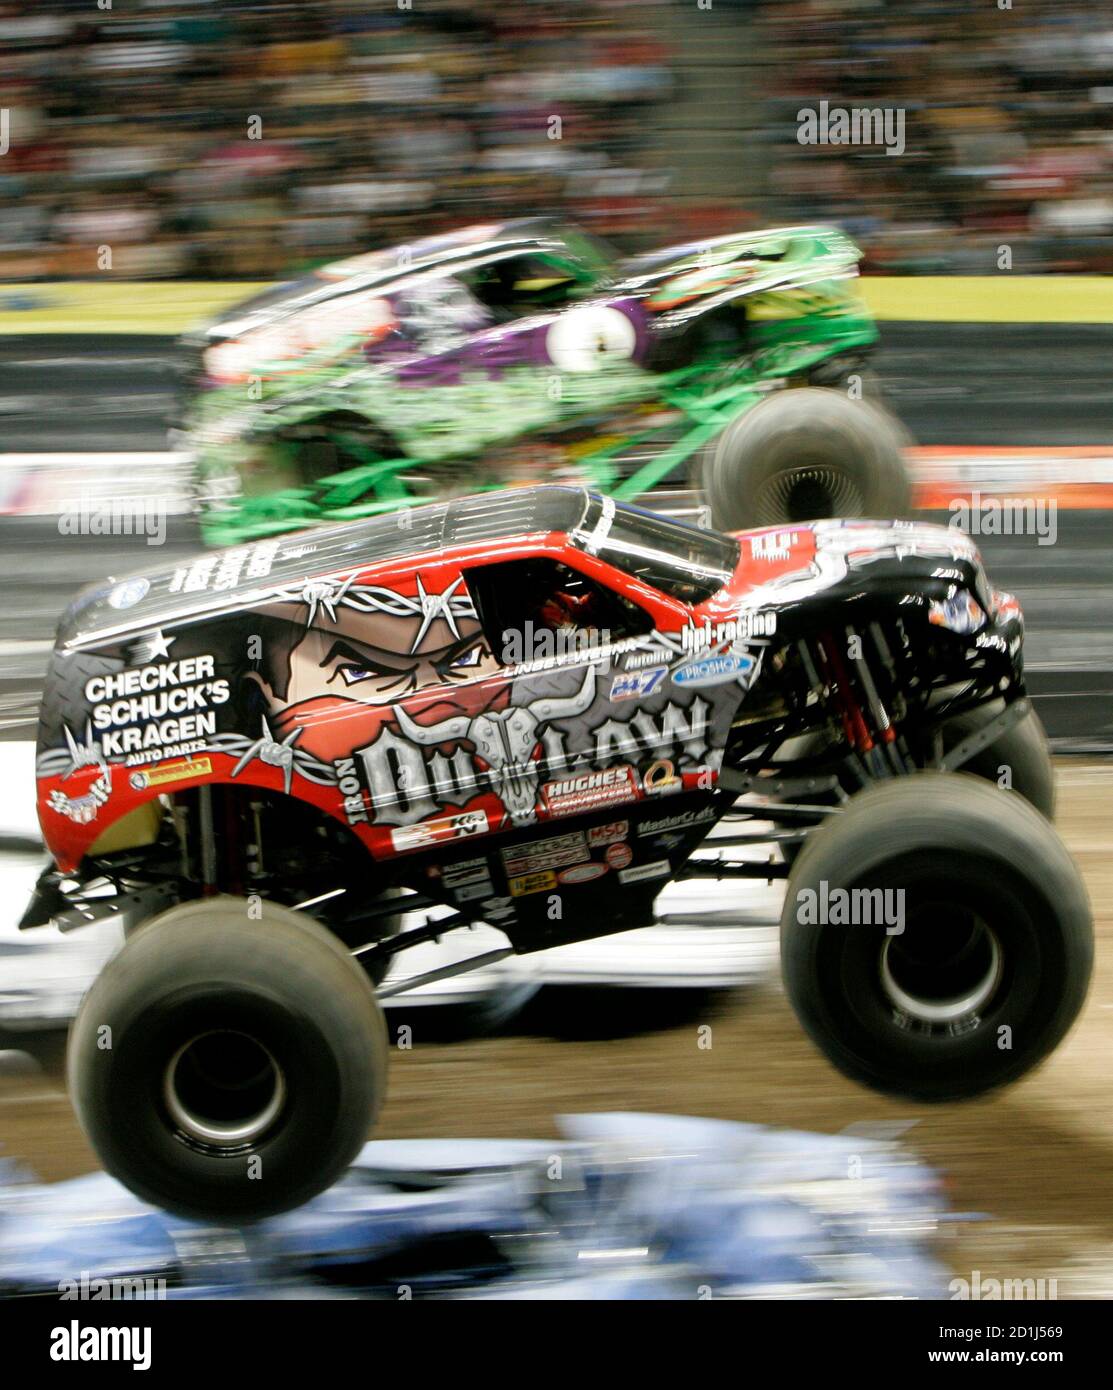 Linsey Weenk Driving Iron Outlaw Bottom Races With Charlie Pauken Driving Grave Digger Top At Monster Jam A Monster Truck Competition In Denver Colorado February 10 2007 Reuters Rick Wilking United States Stock